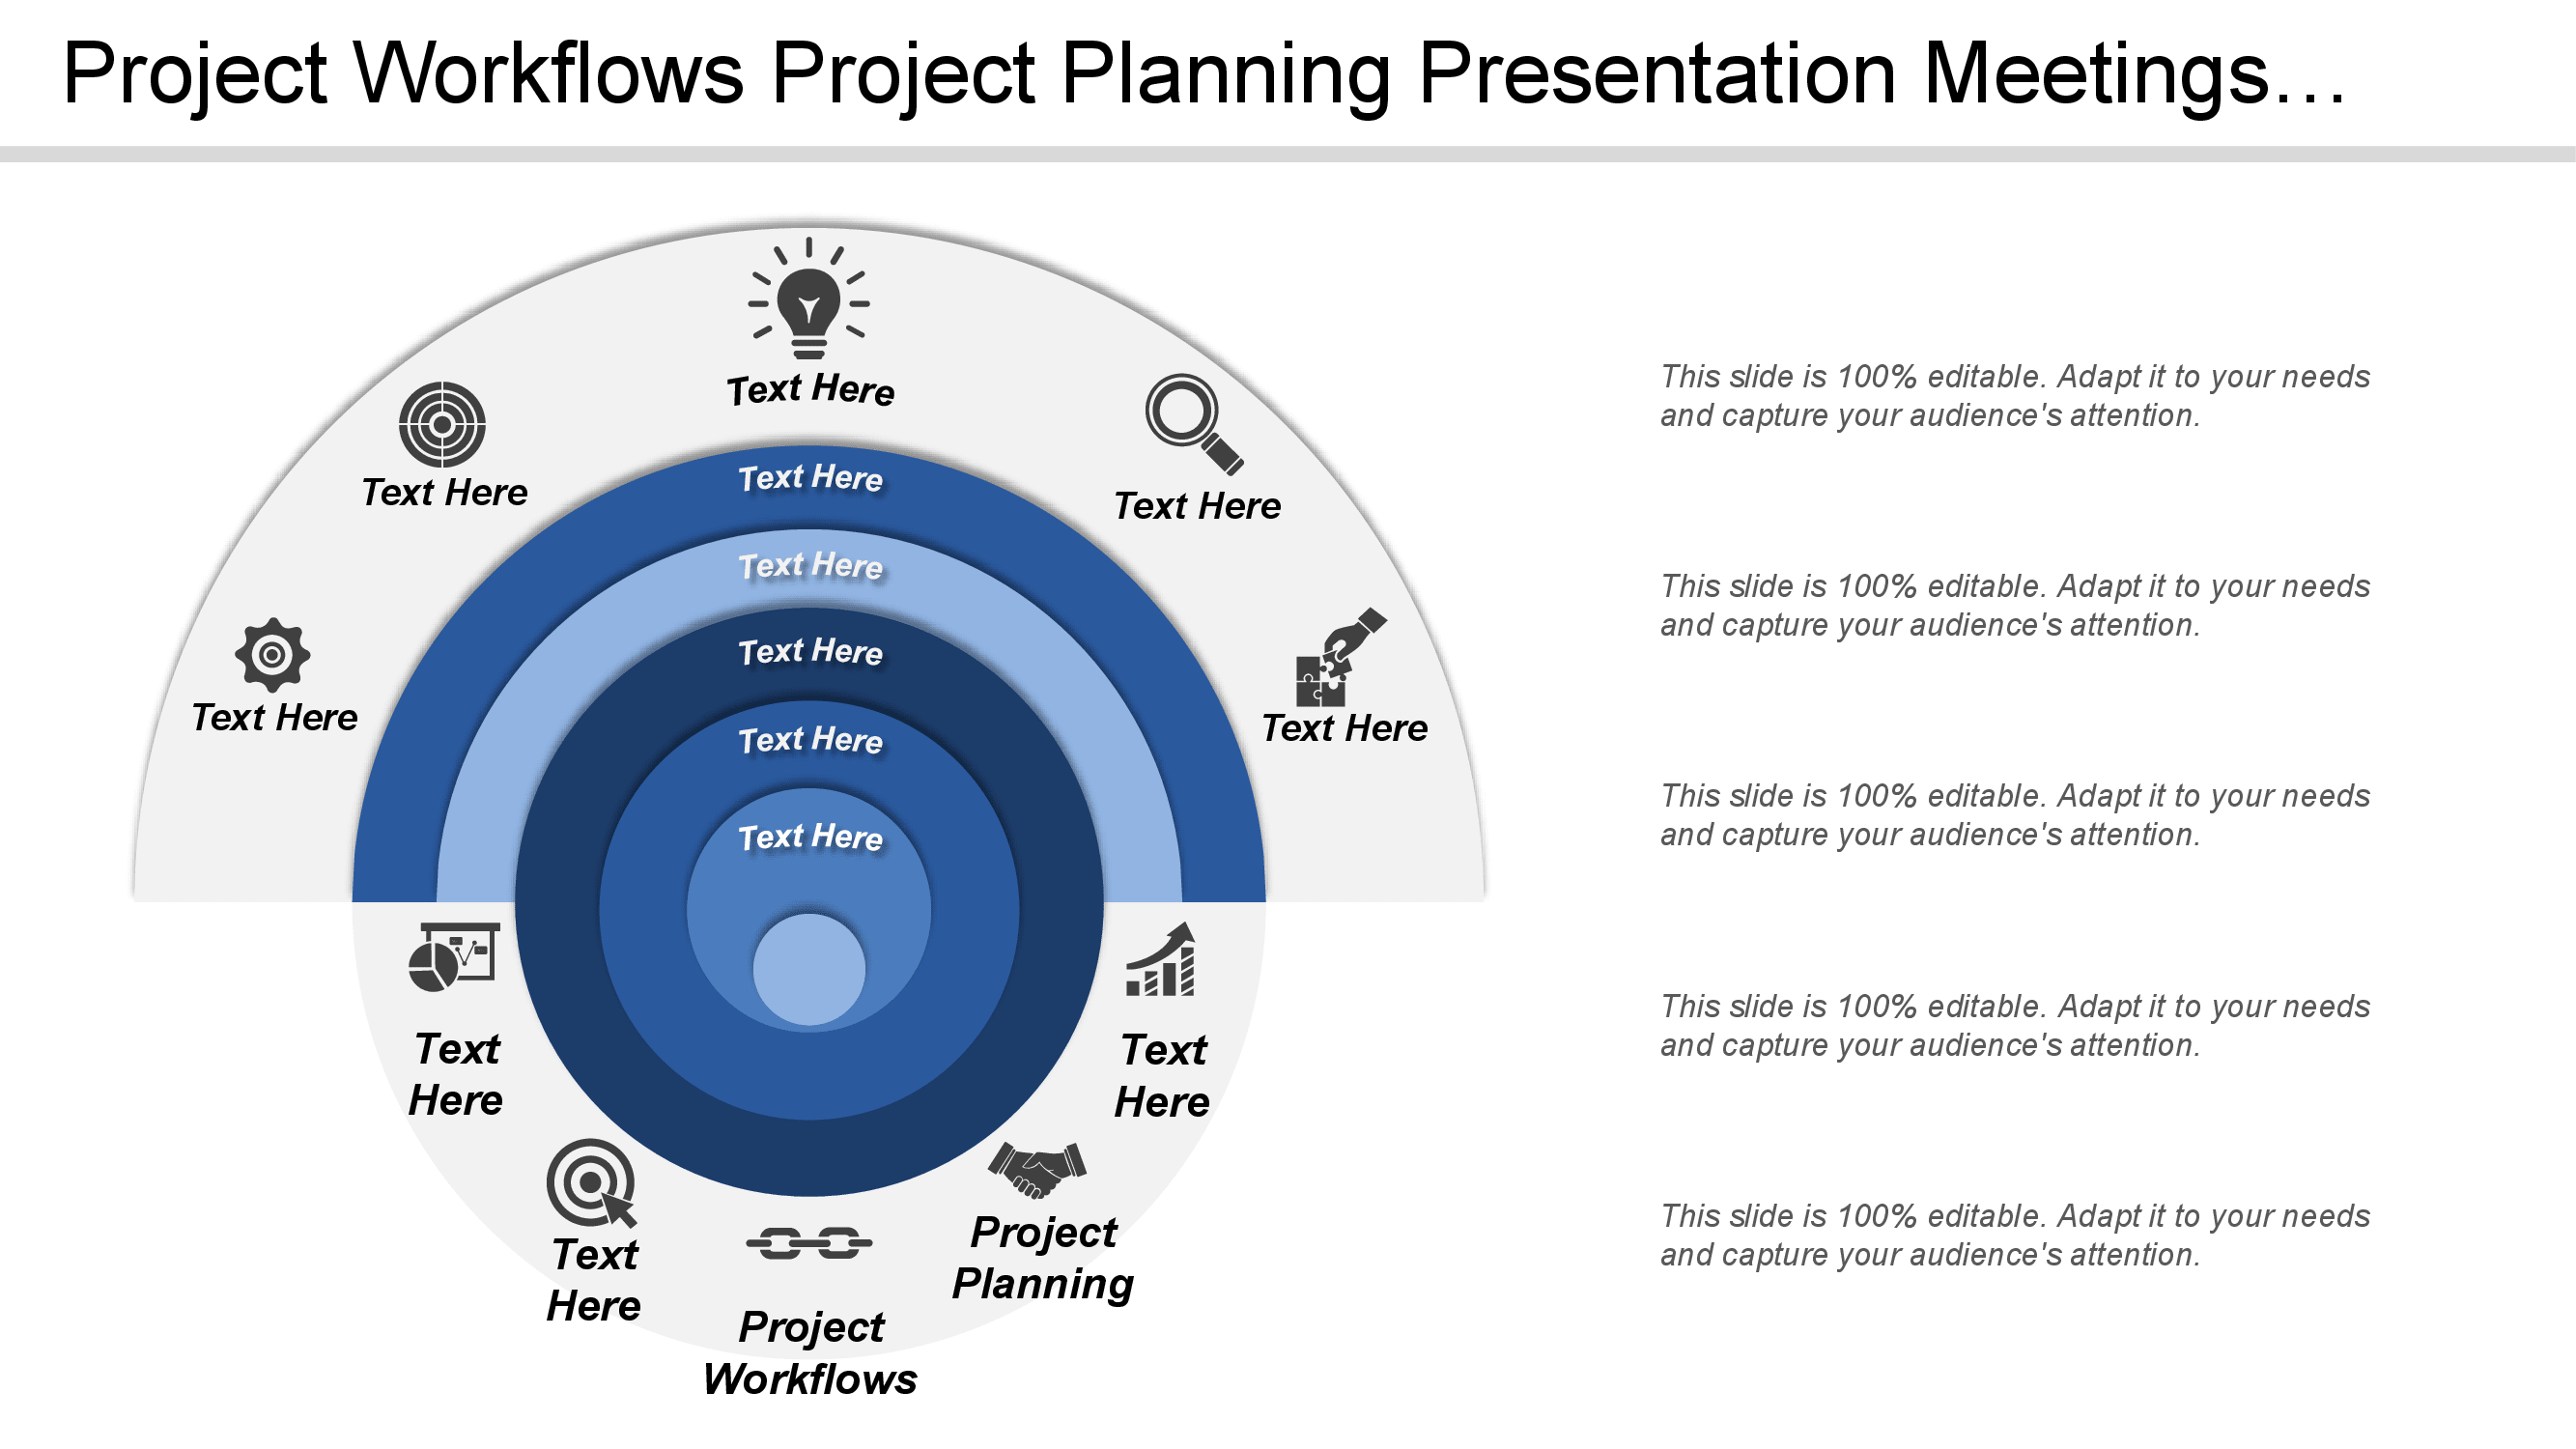 Project Workflows Project Planning Presentation Meetings